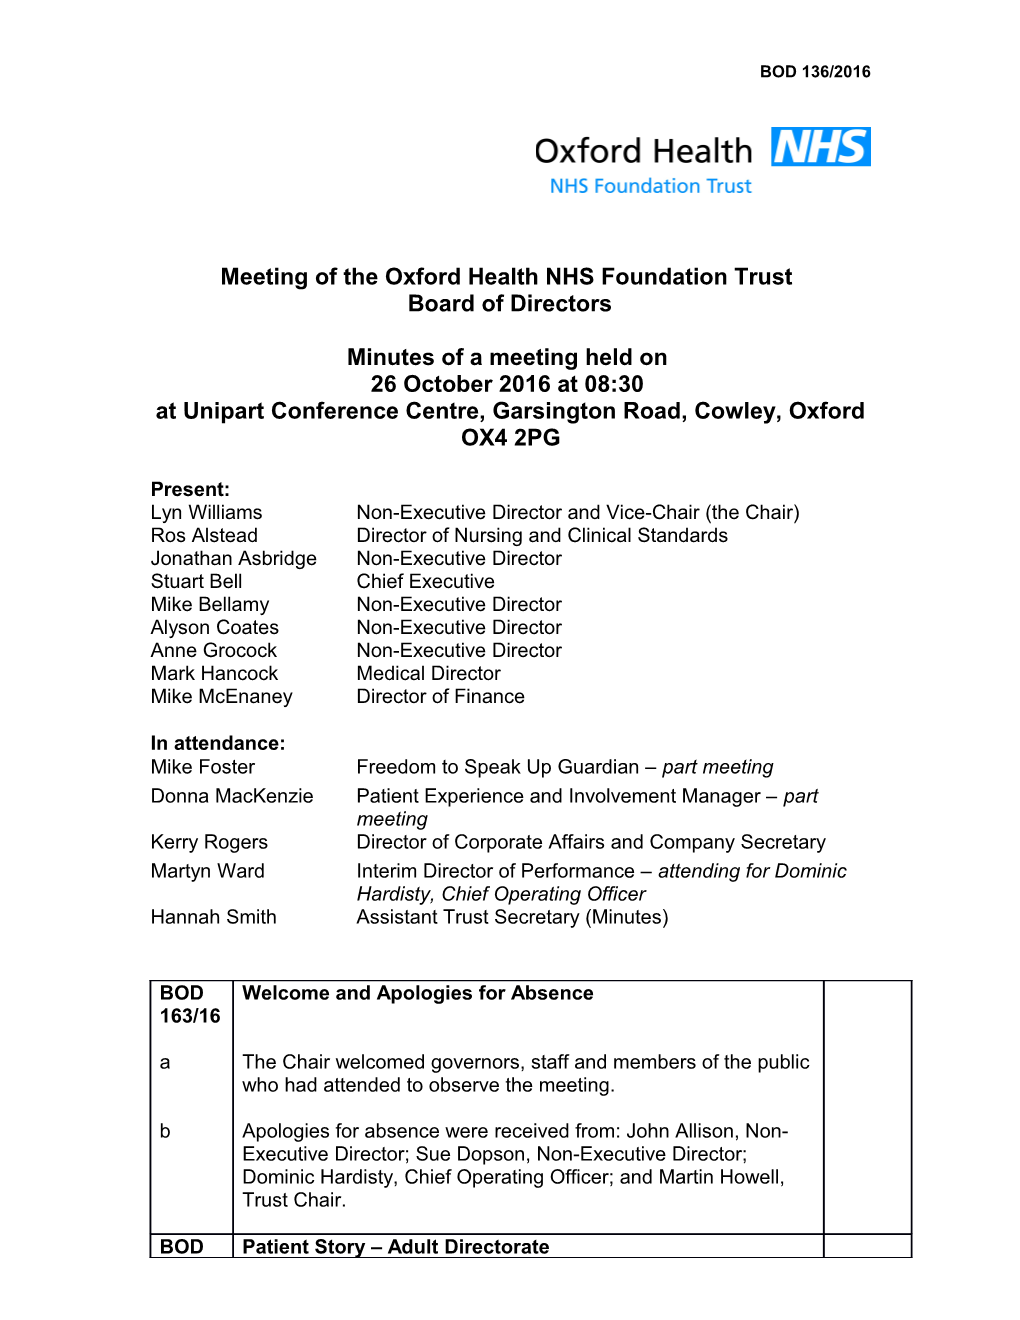 Meeting of the Oxford Health NHS Foundation Trust